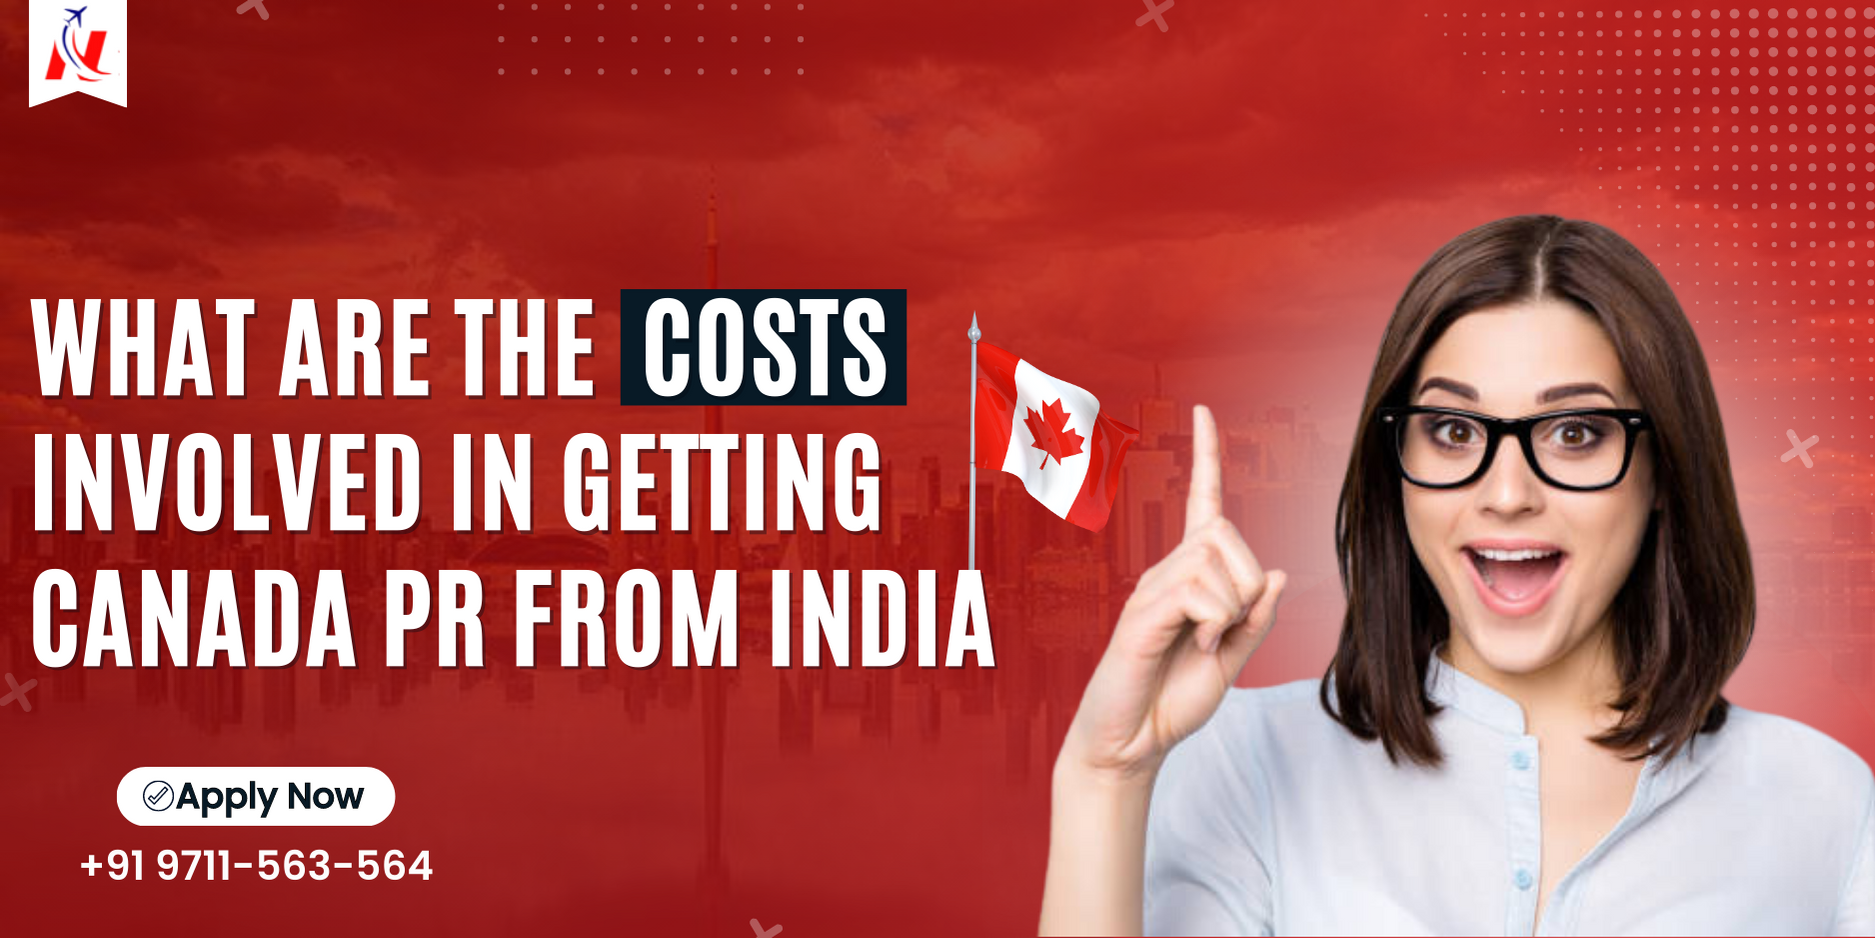 What are the costs involved in getting Canada PR from India? 